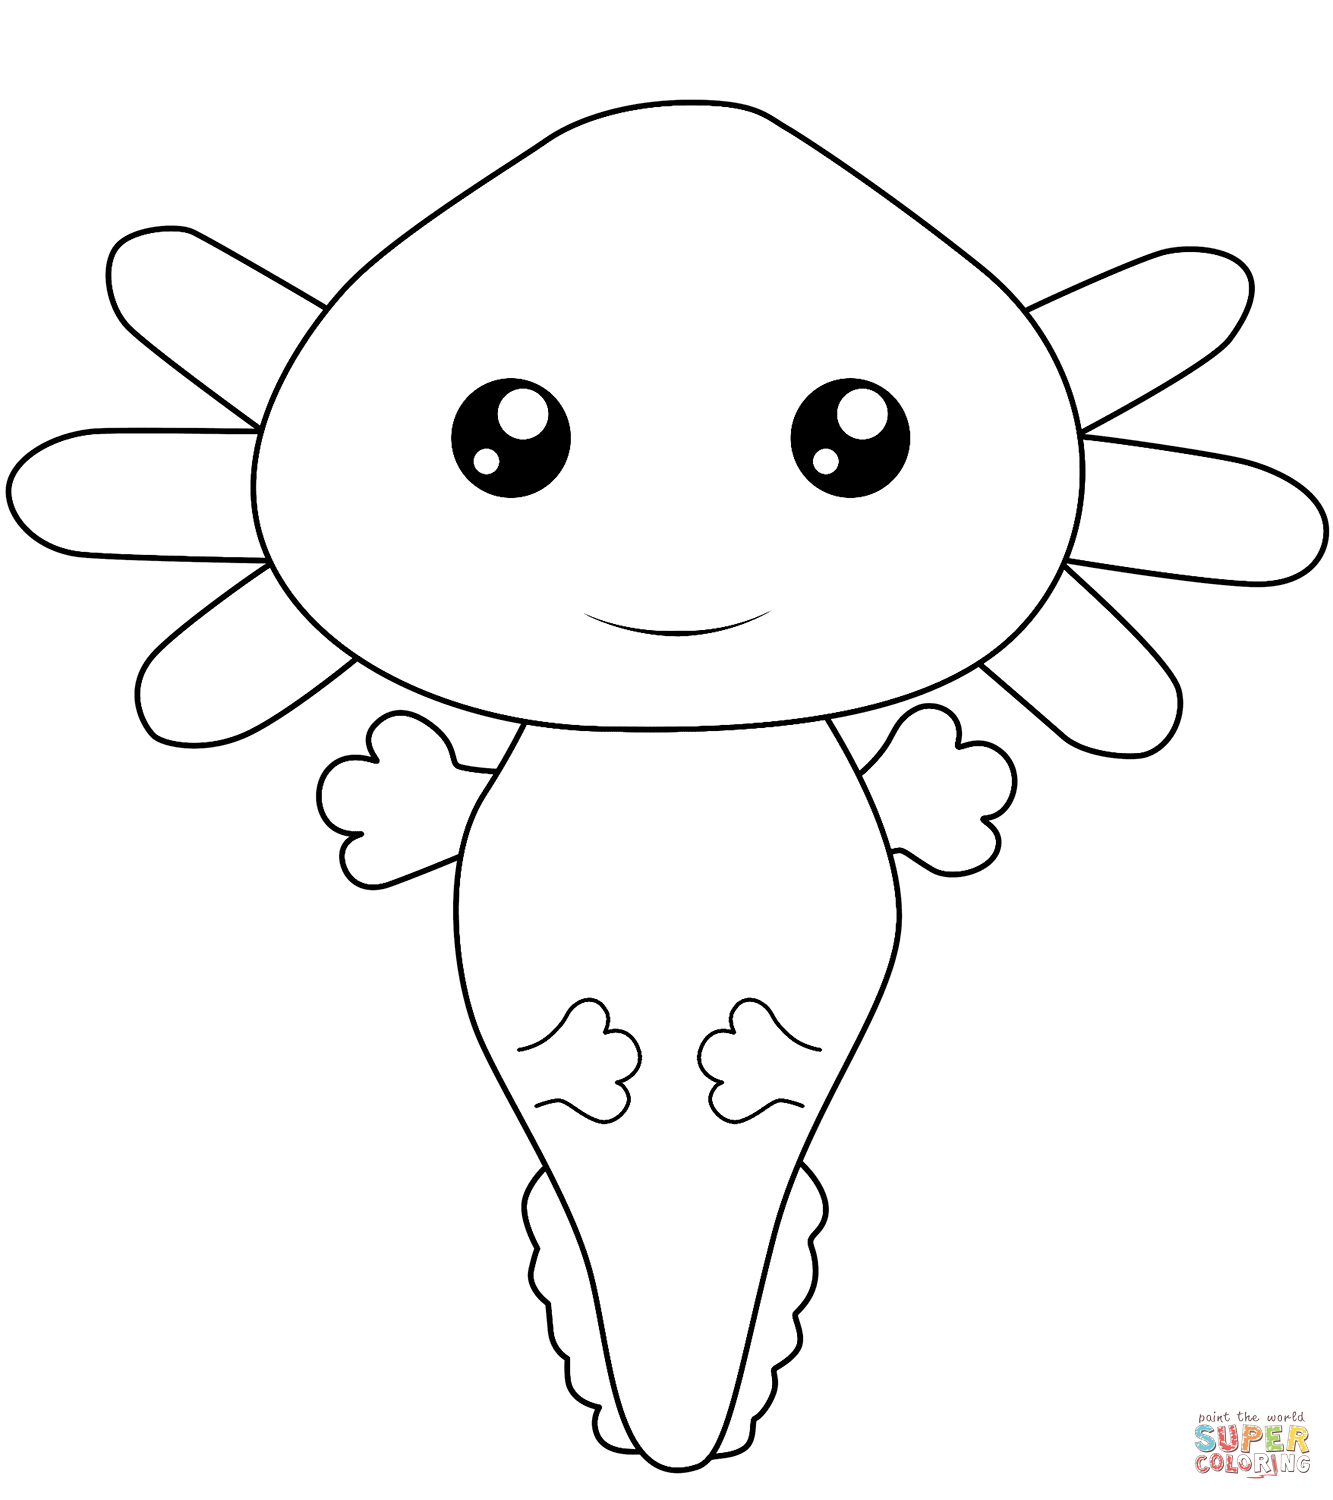 Axolotl Coloring Pages - Coloring Home